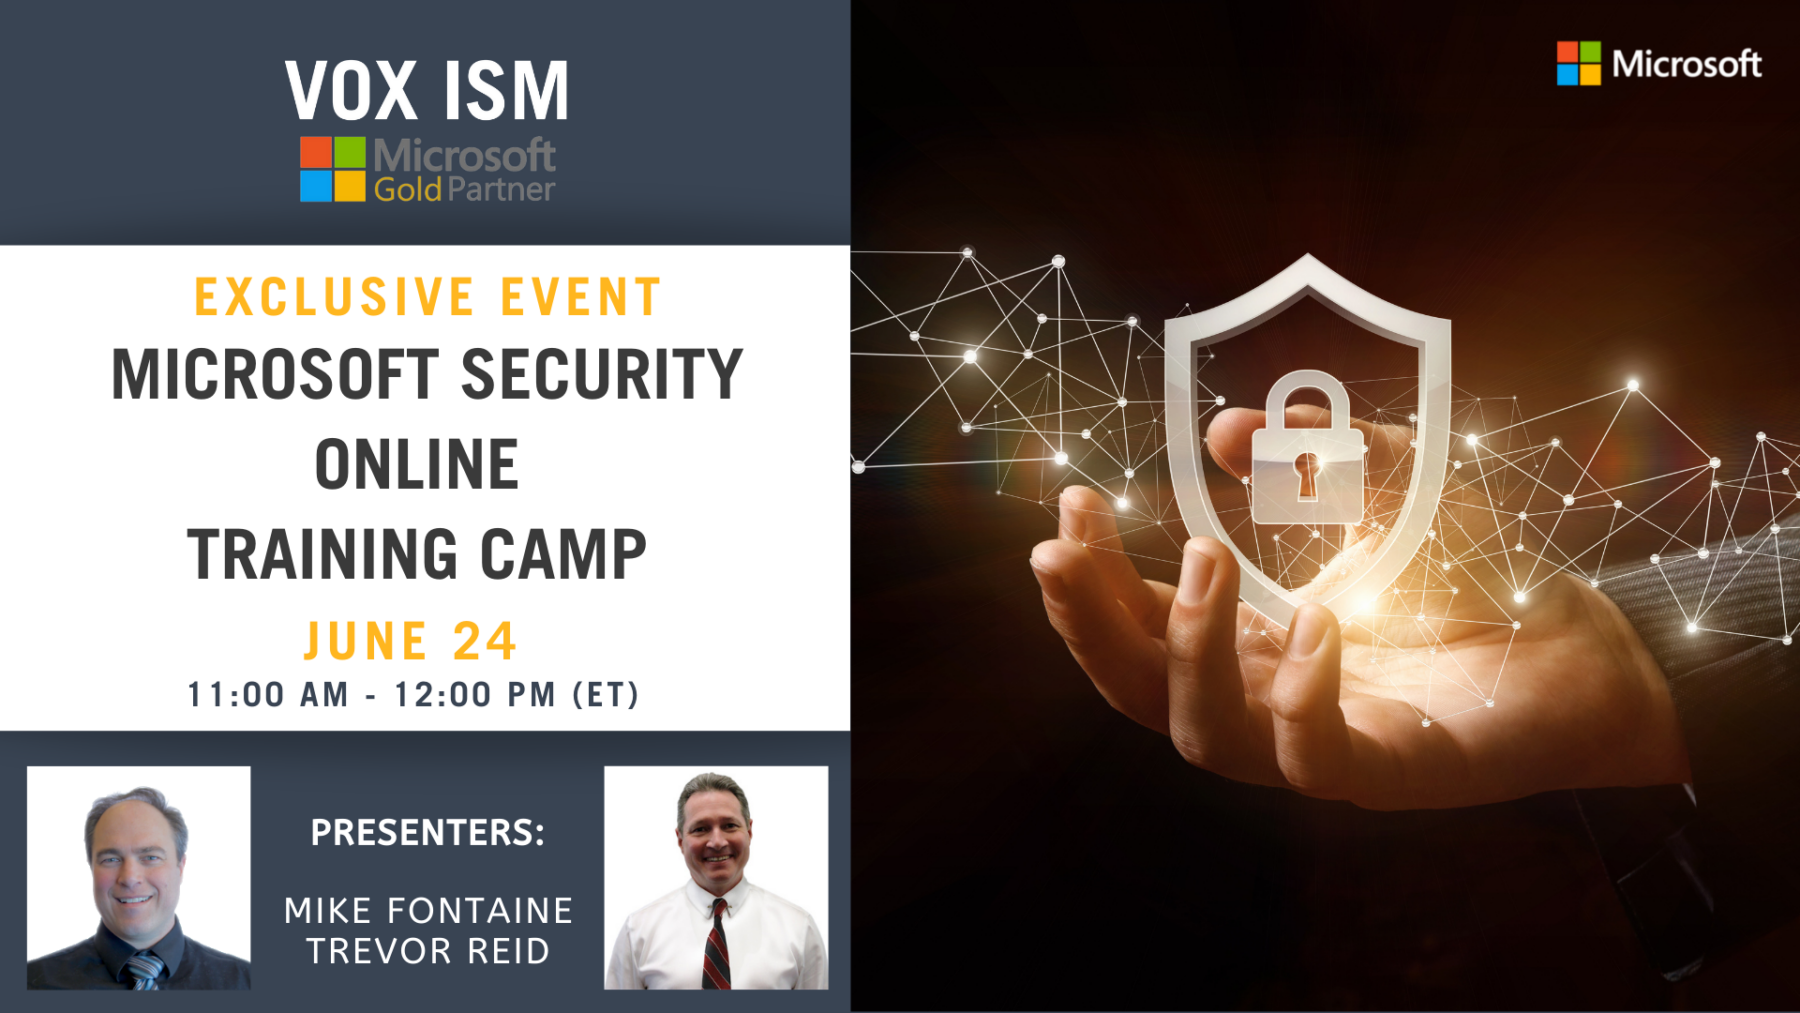 Microsoft Security Online Training Camp - July 24